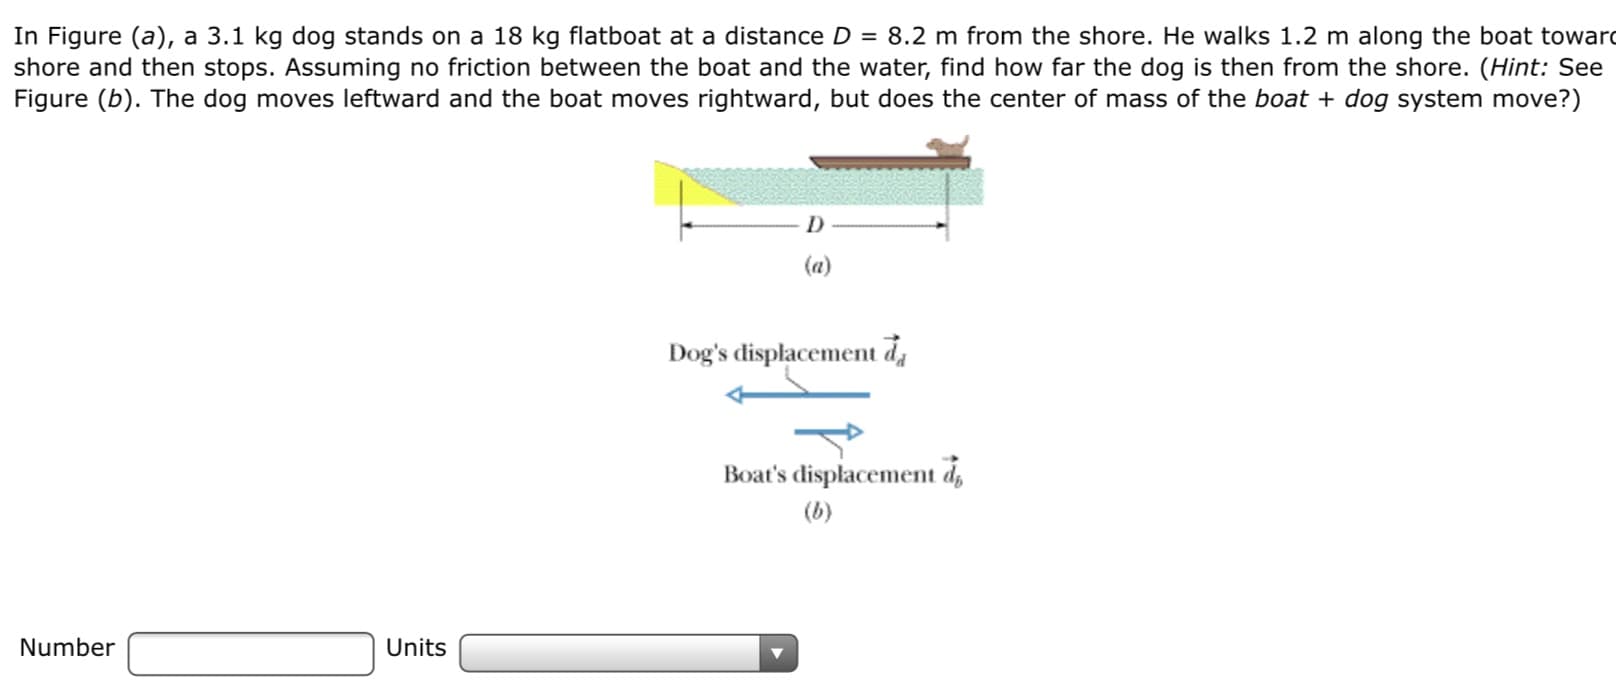 In Figure (a), a 3.1 kg dog stands on a 18 kg flatboat at a distance D = 8.2 m from the shore. He walks 1.2 m along the boat toward
shore and then stops. Assuming no friction between the boat and the water, find how far the dog is then from the shore. (Hint: See
Figure (b). The dog moves leftward and the boat moves rightward, but does the center of mass of the boat + dog system move?)
(a)
Dog's displacement da
Boat's displacement d,
(b)
Number
Units
